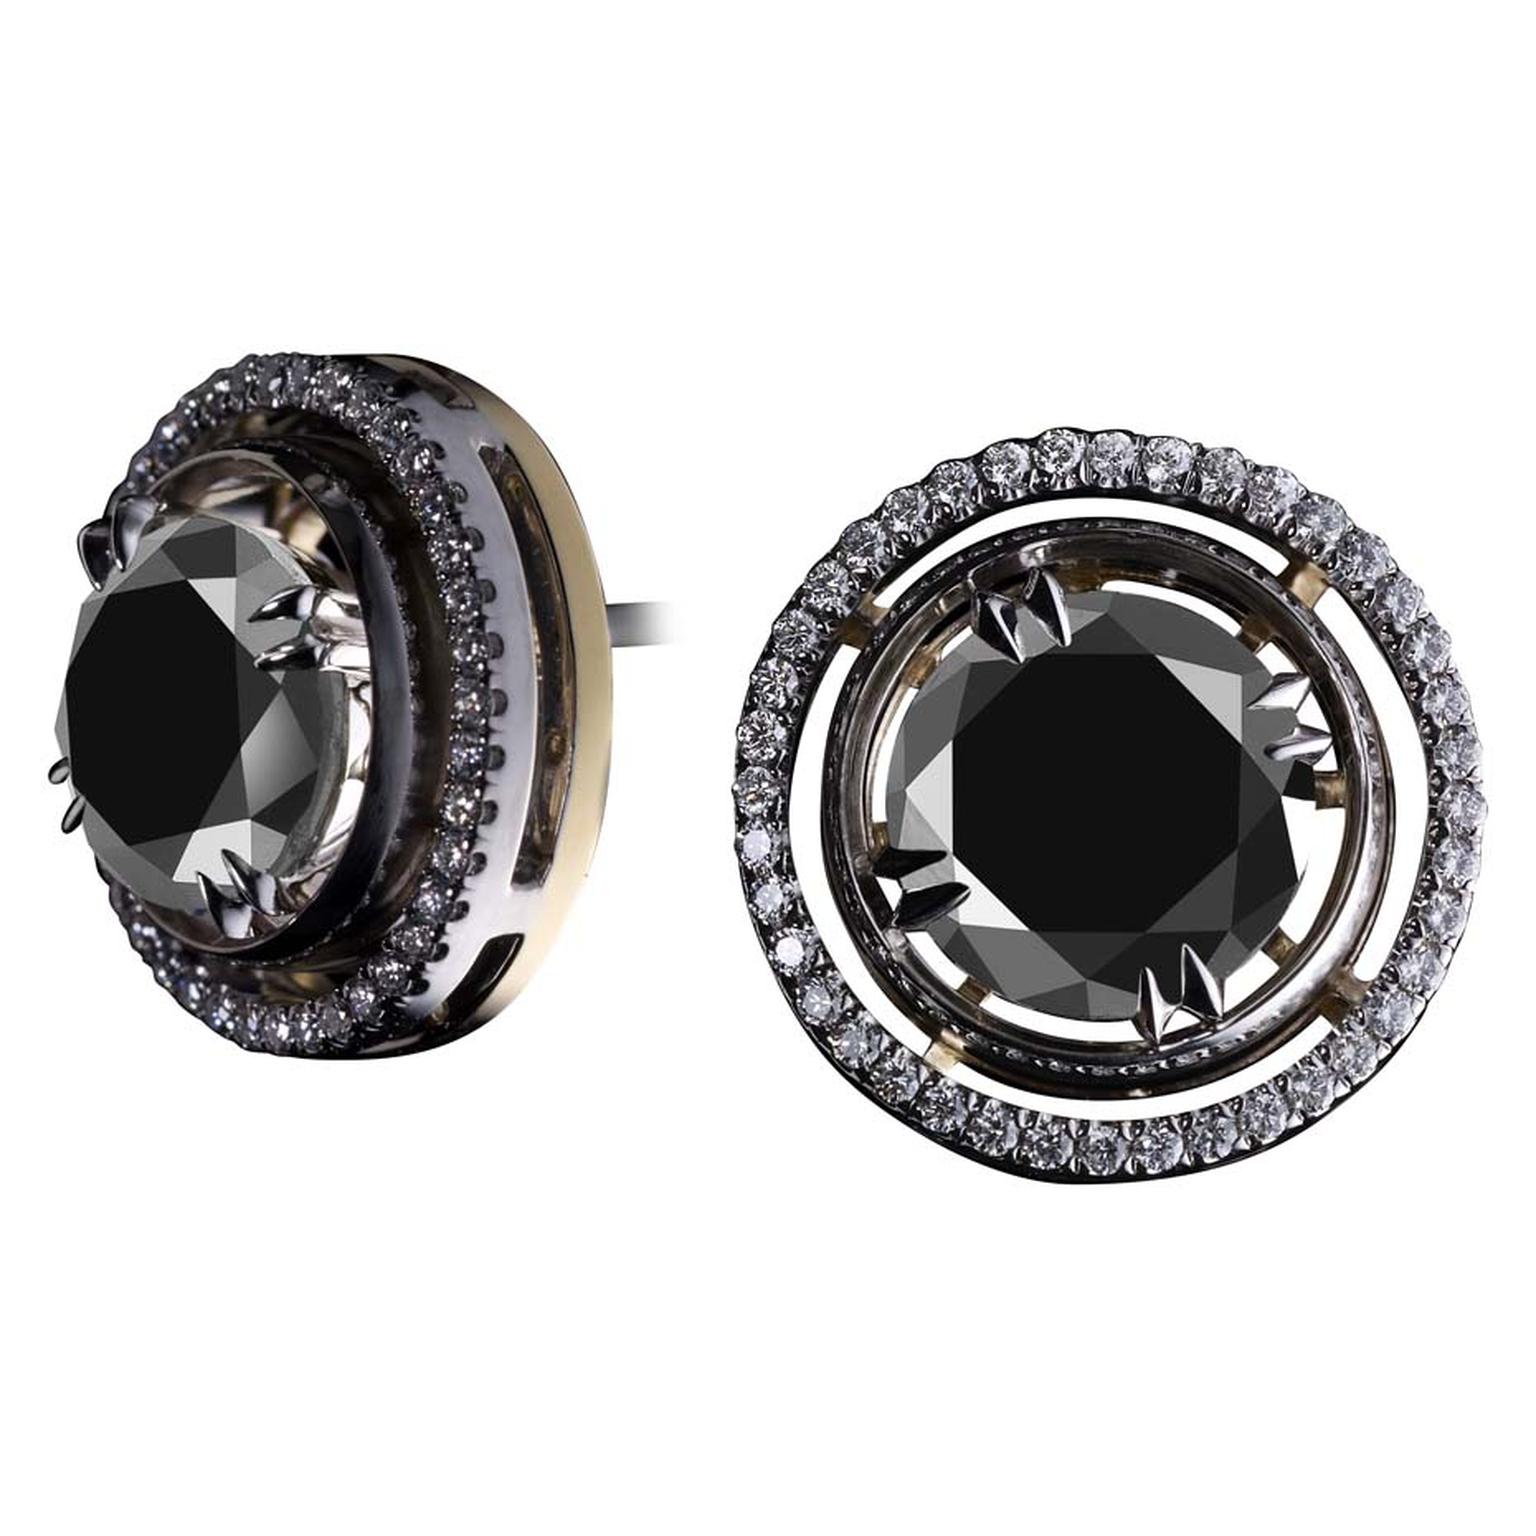 Alexandra Mor's limited edition black diamond stud earrings are available in yellow or white gold, encircled by round diamonds.